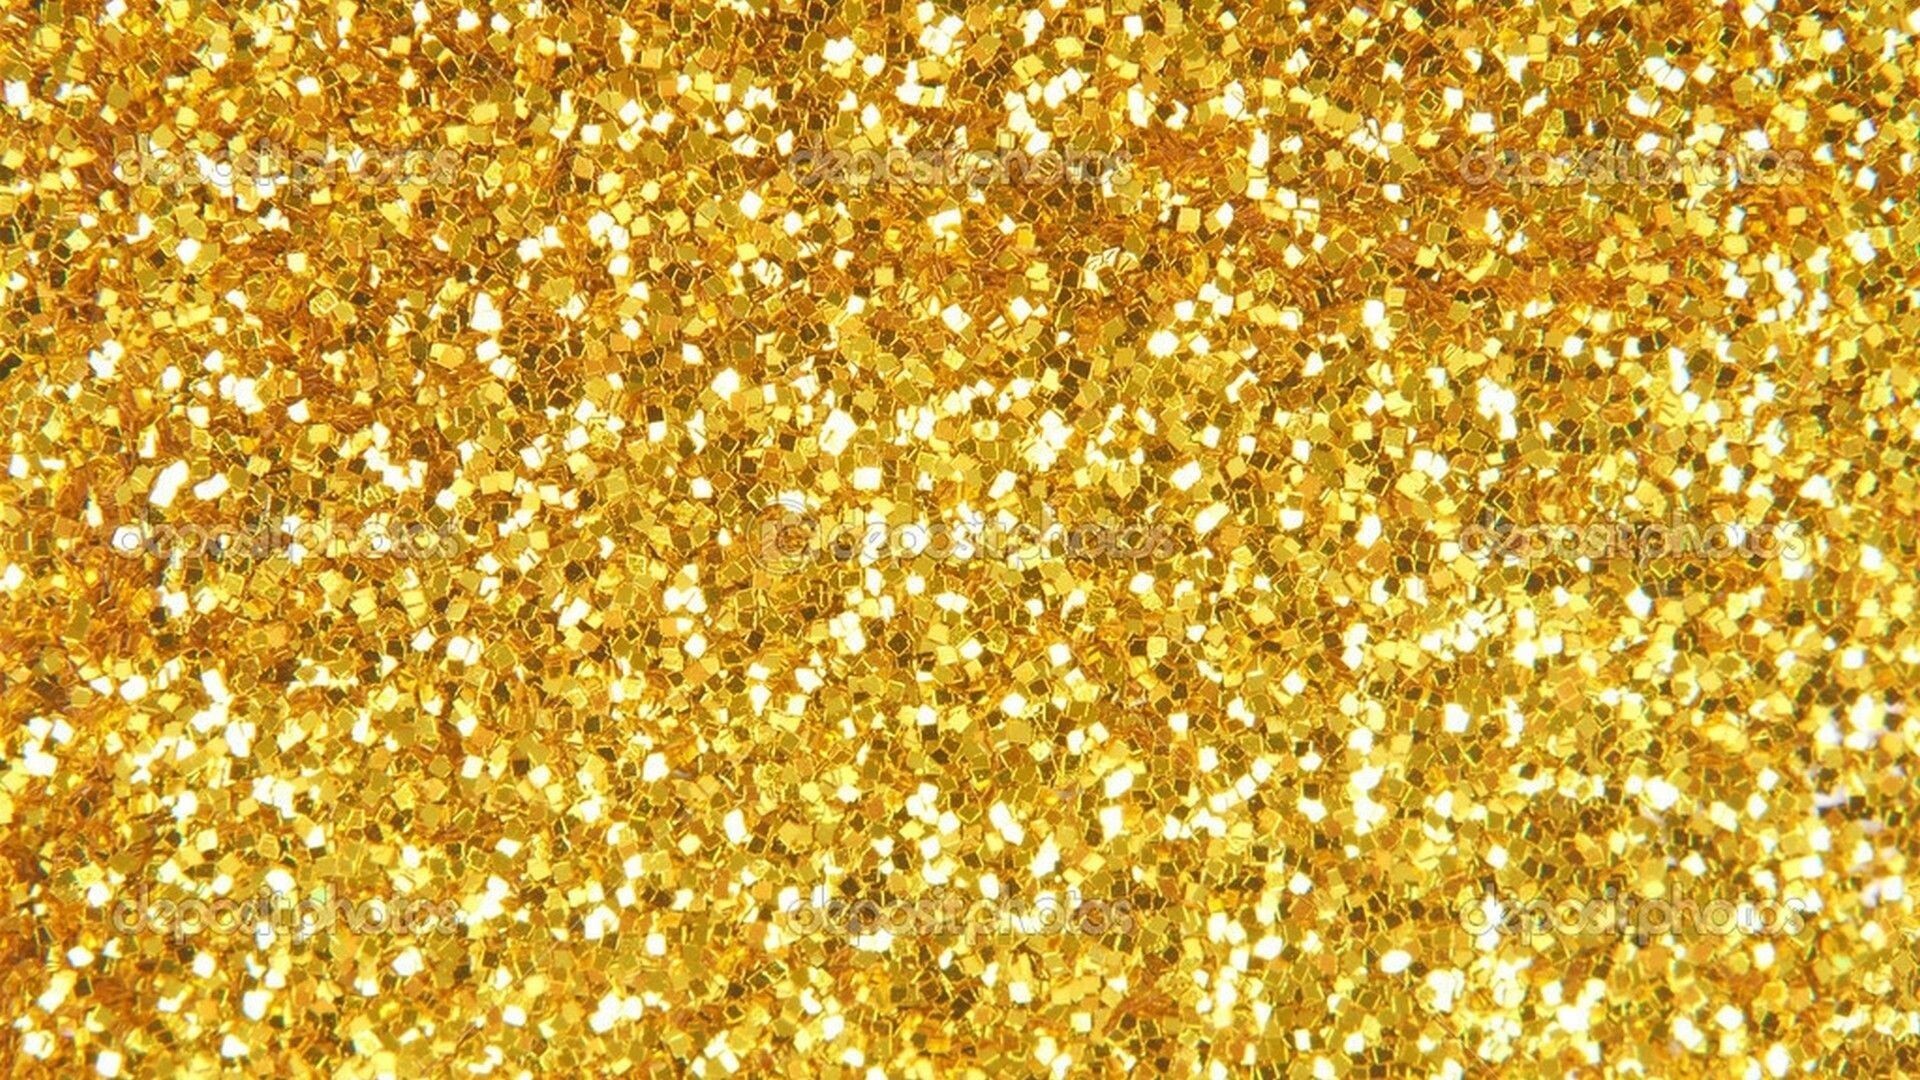 Gold Glitter: An assortment of small, reflective particles that come in a variety of shapes, sizes, and colors. 1920x1080 Full HD Wallpaper.